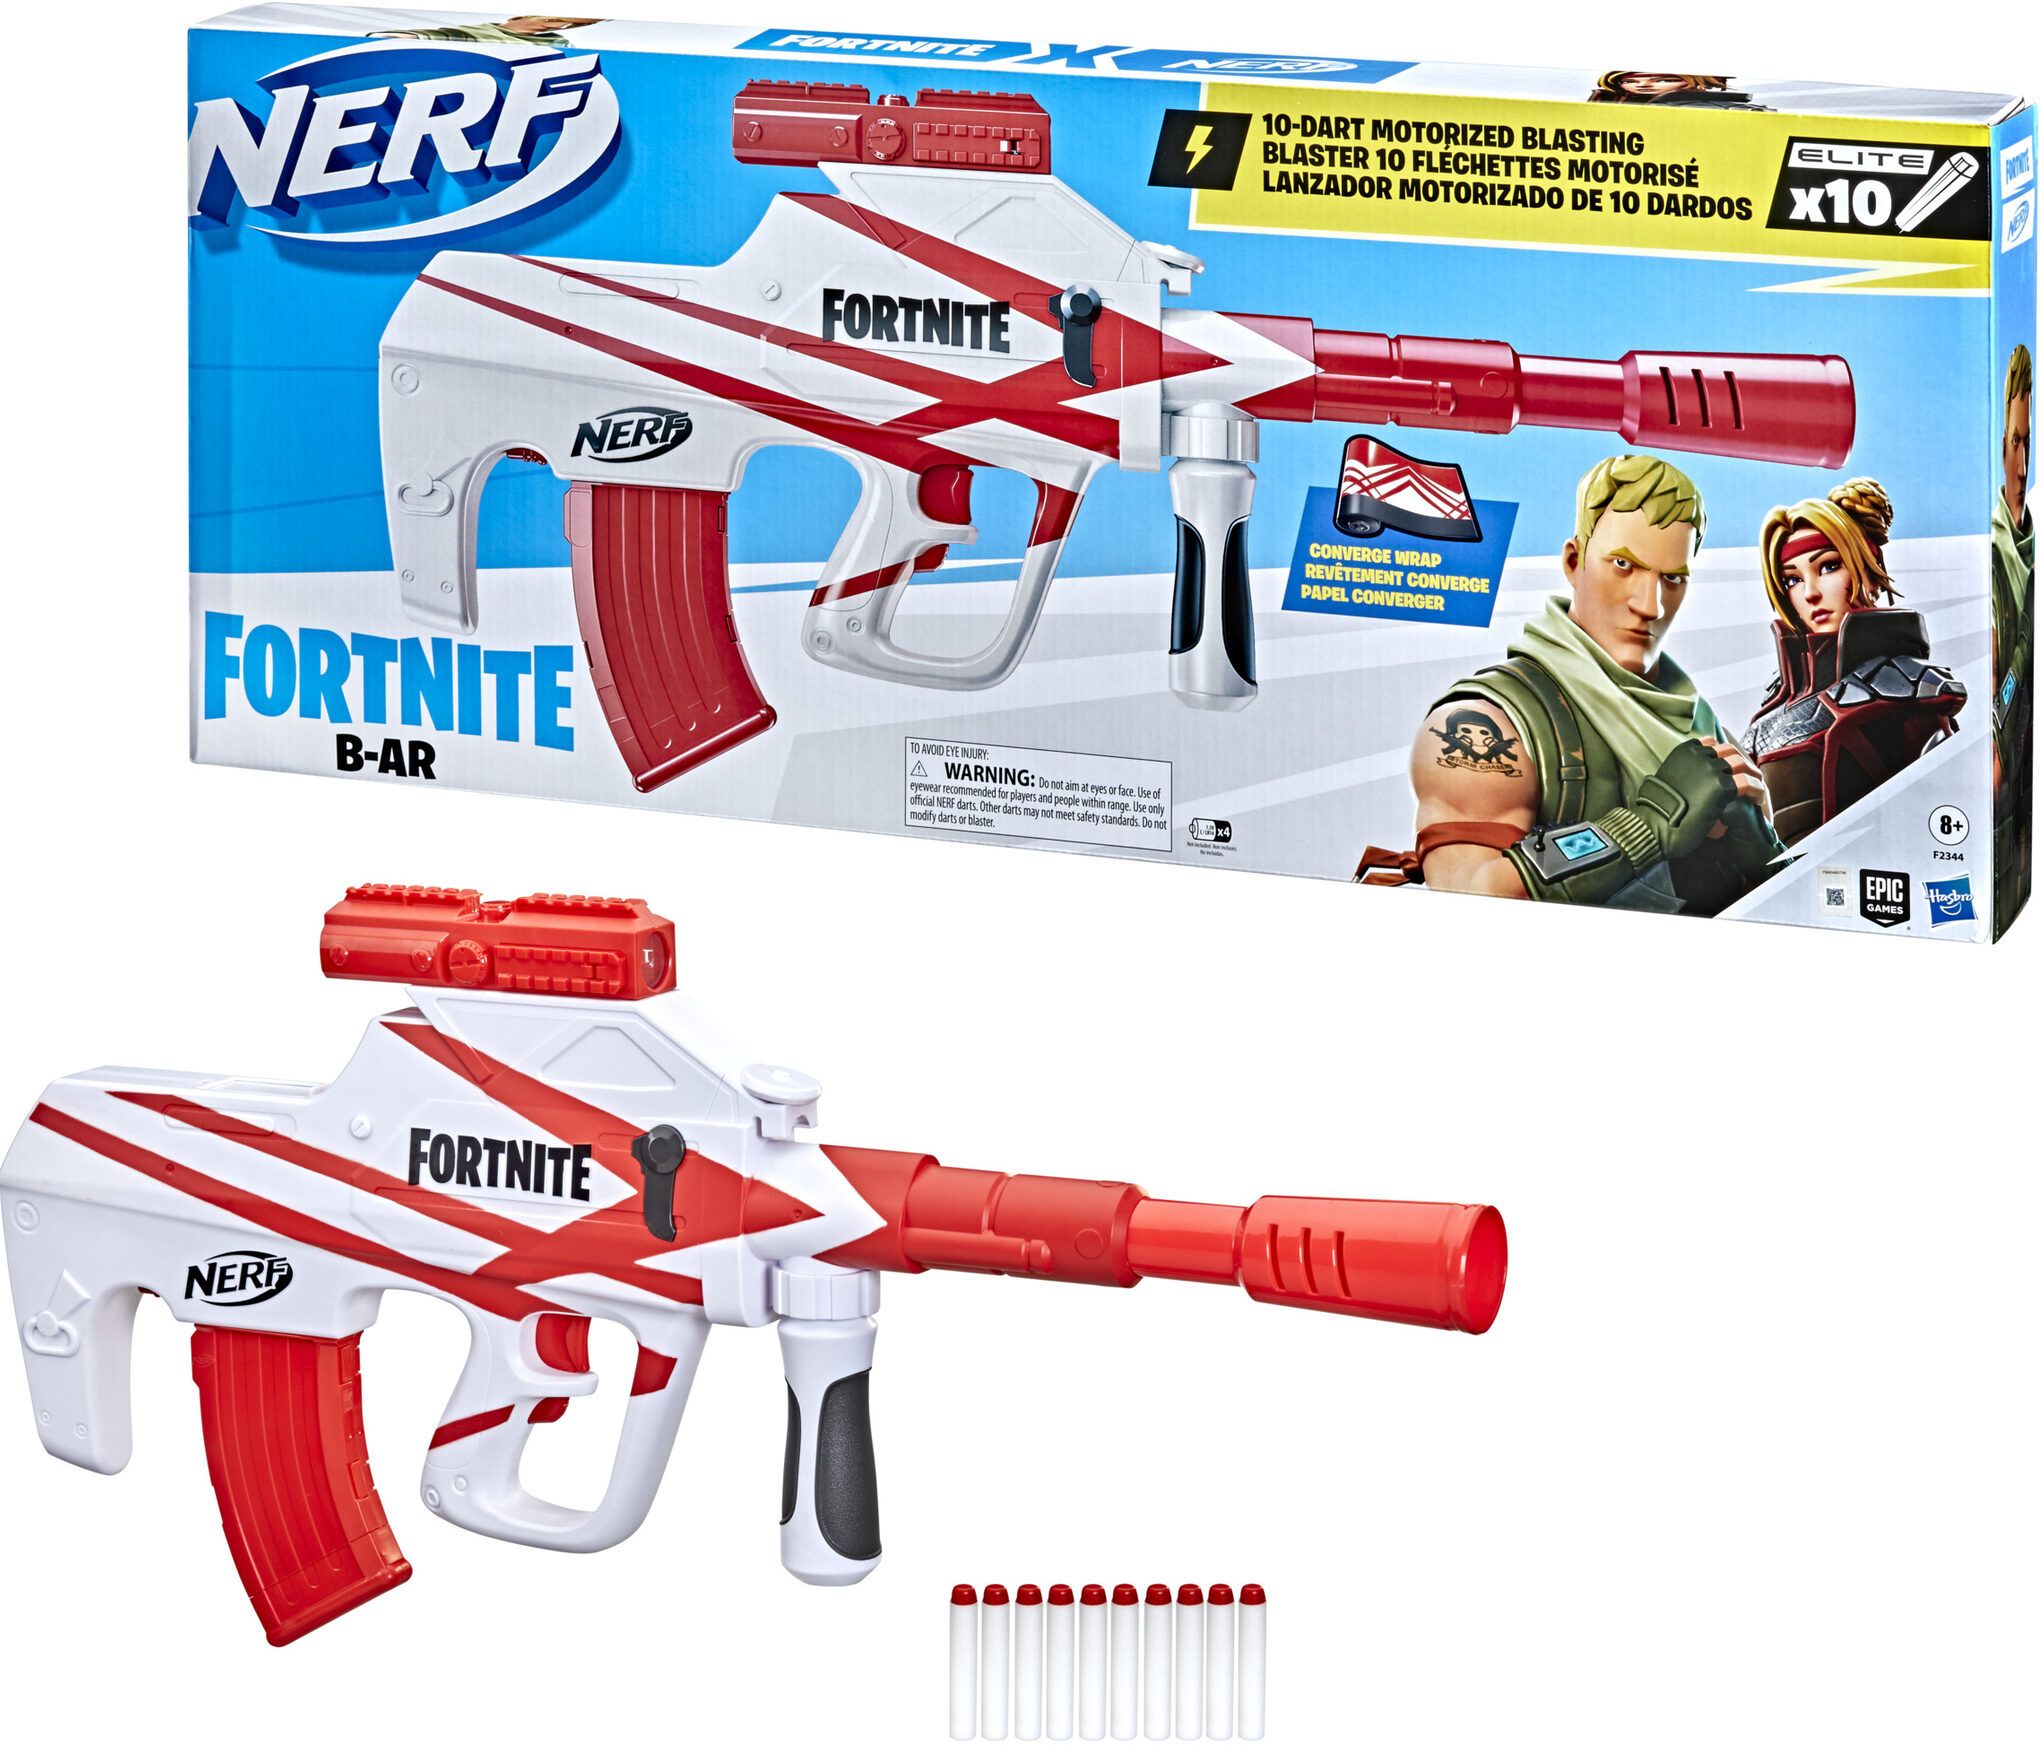 Hasbro F2486 Nerf Roblox Adopt Me!: BEES! Lever Action Blaster, 1 - Foods  Co.